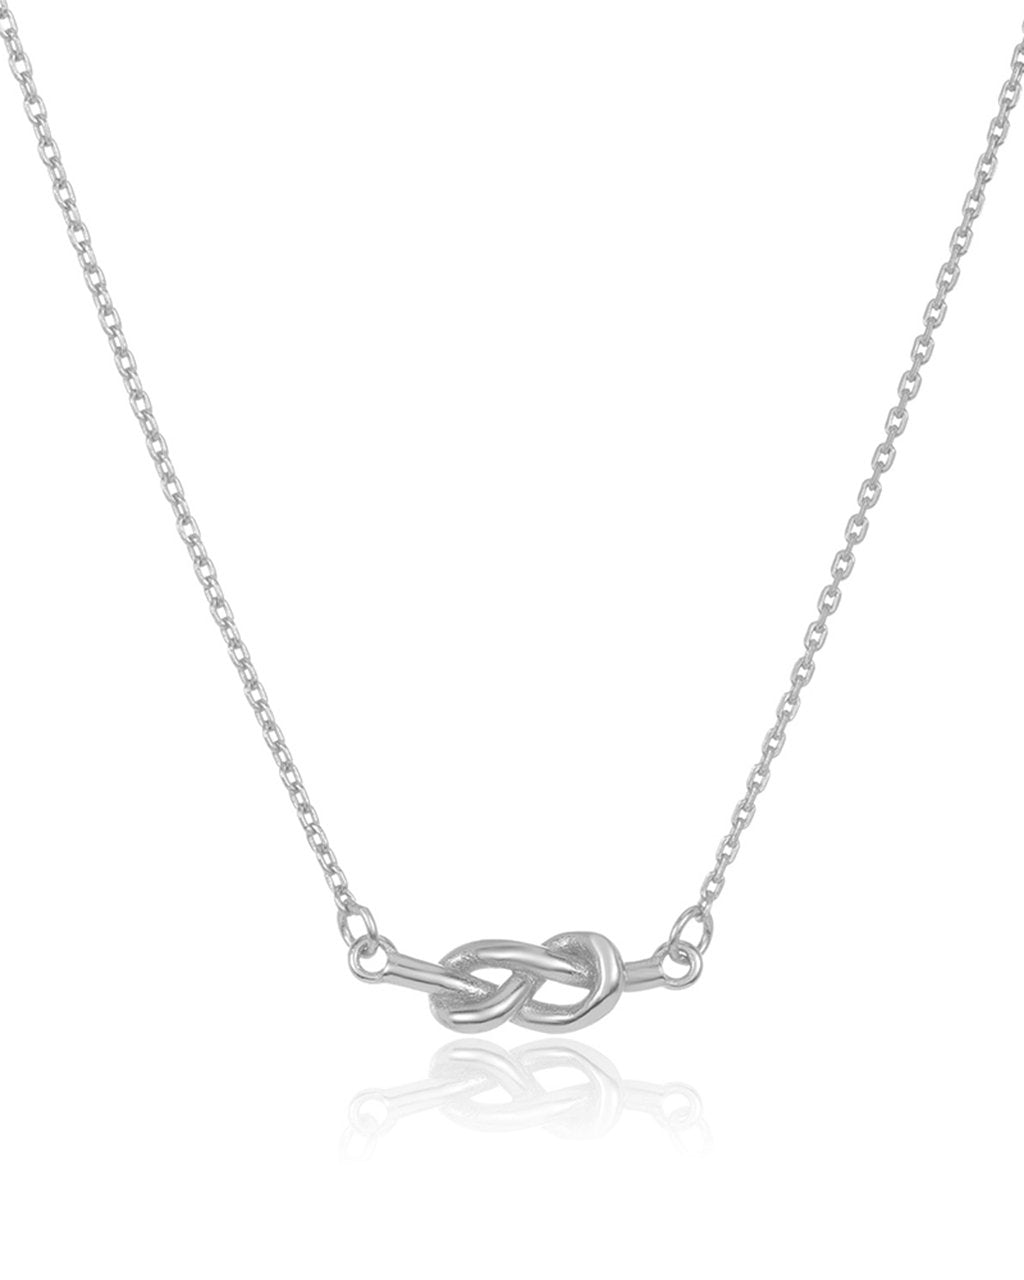 Sterling Silver Infinity Love Knot Necklace - Sterling Forever